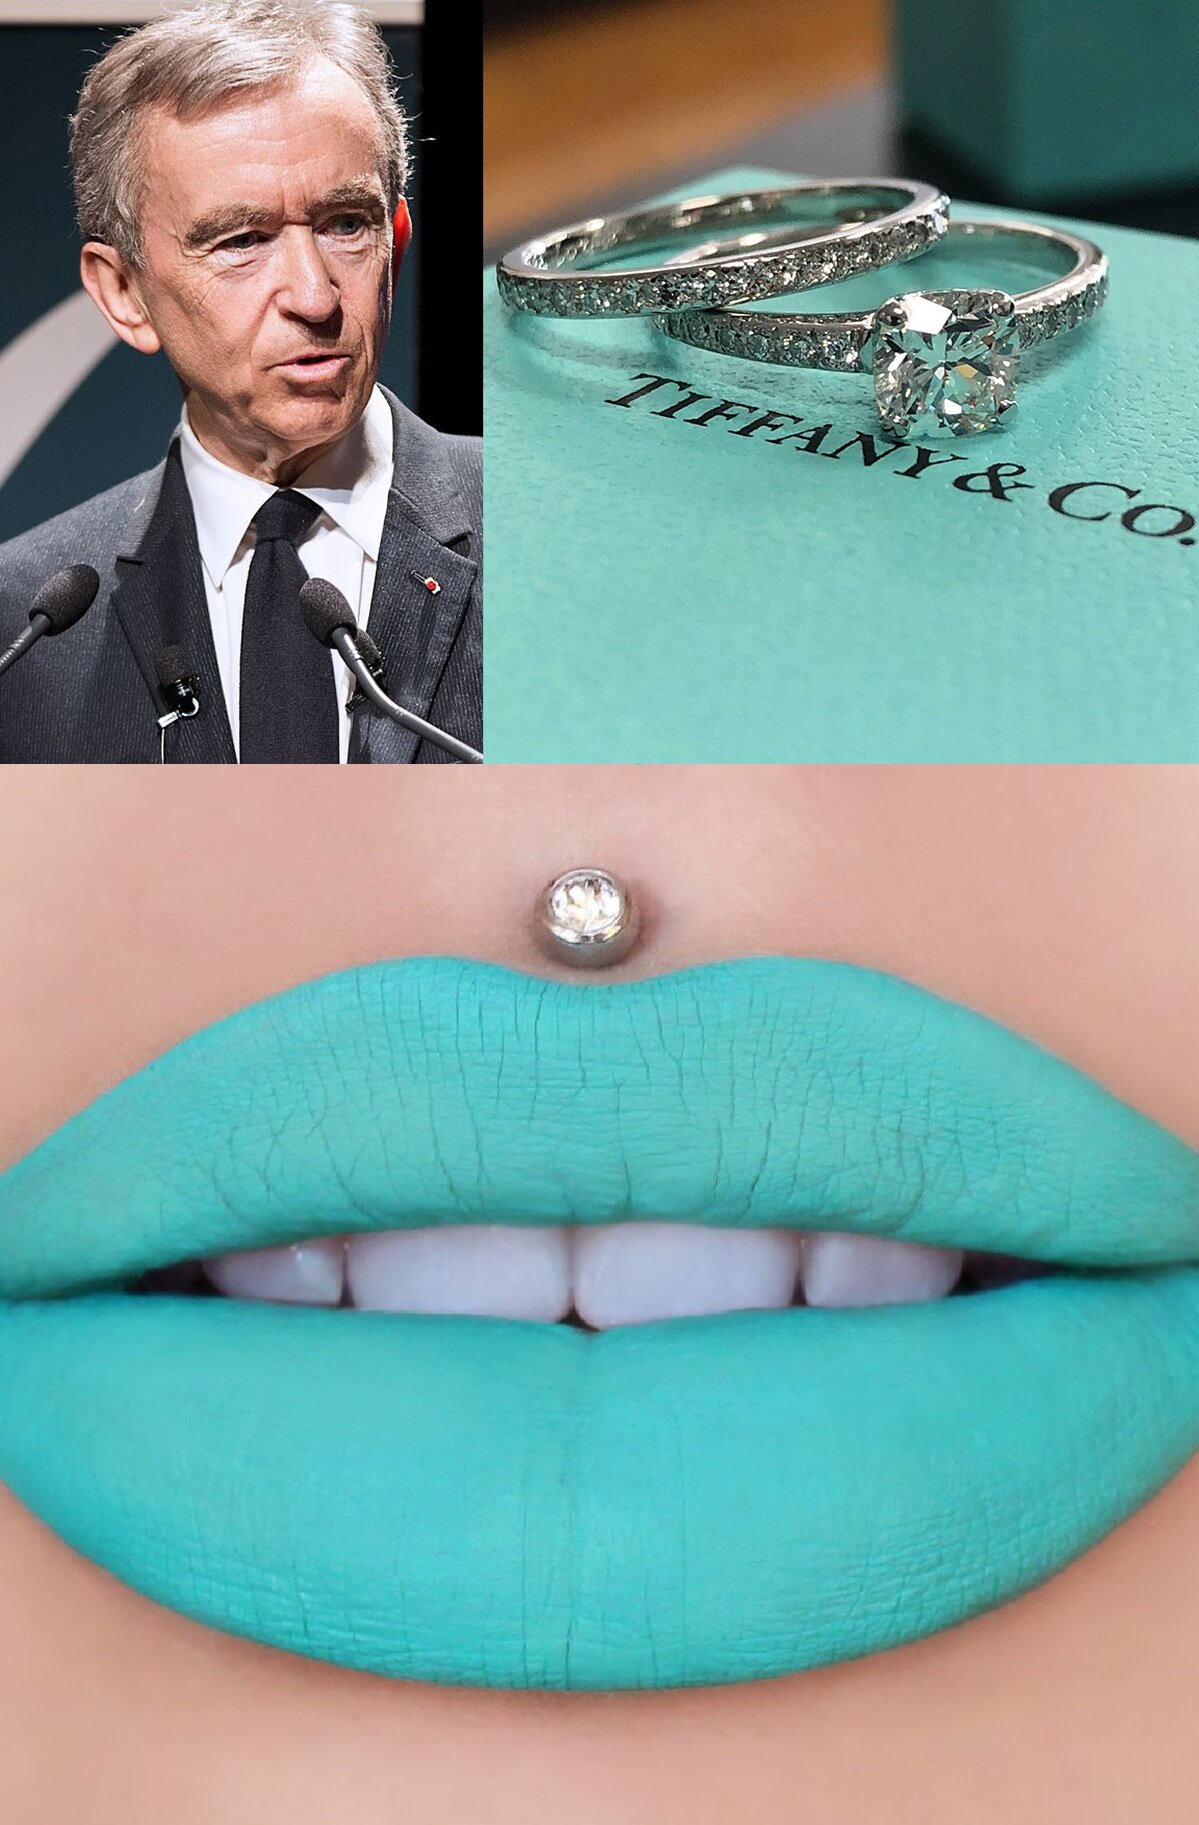 LVMH Buys Tiffany & Co $16.2 Billion, Largest Luxury Deal Ever